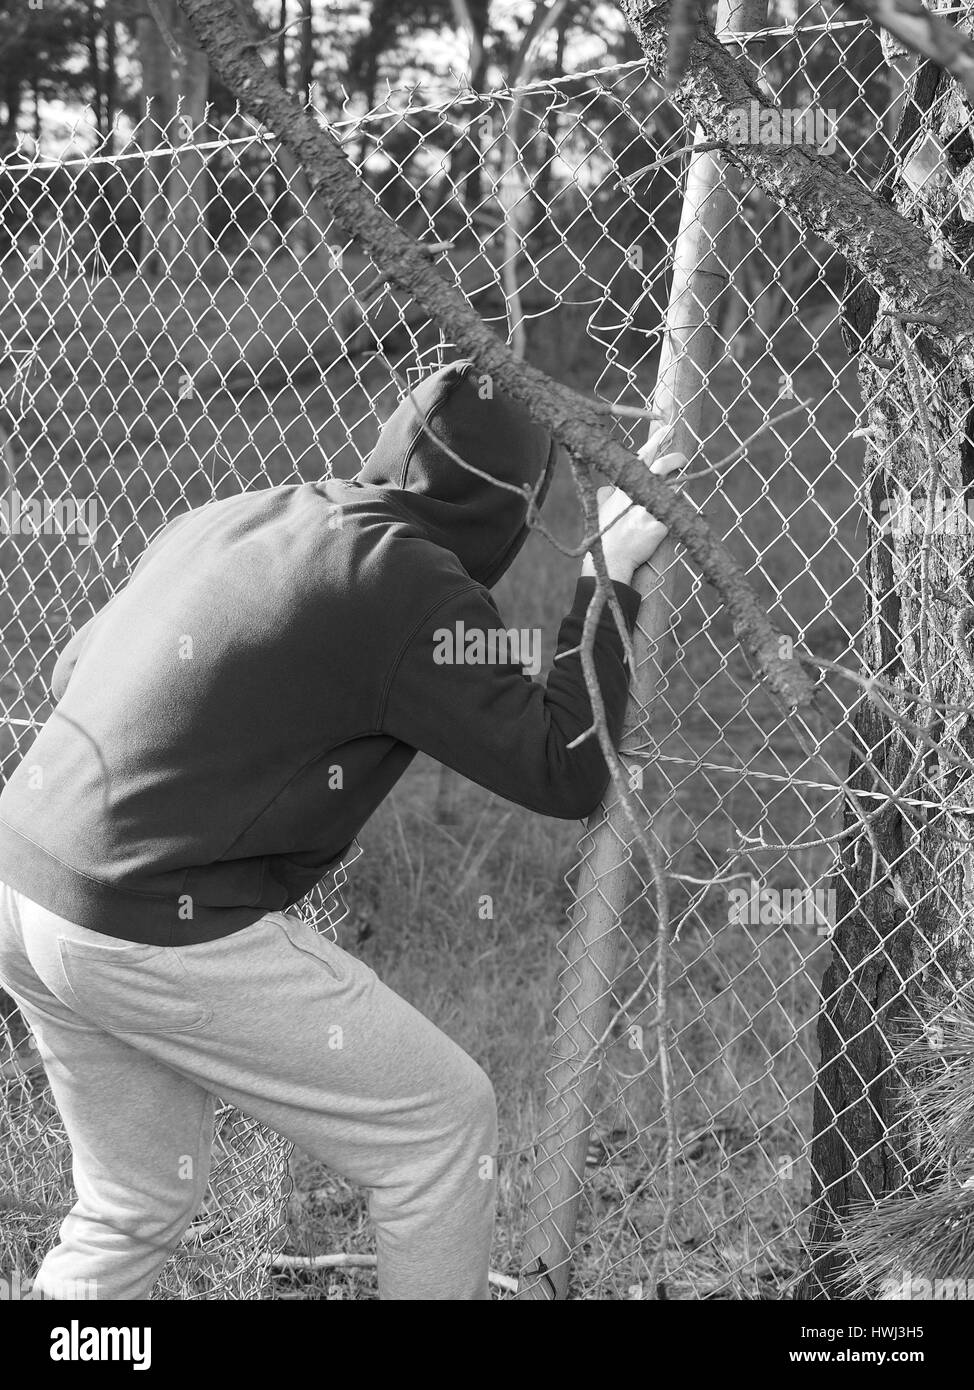 Person crawling through a fence opening with hand clinging to a steel wire , black and white, Australia 2016 Stock Photo